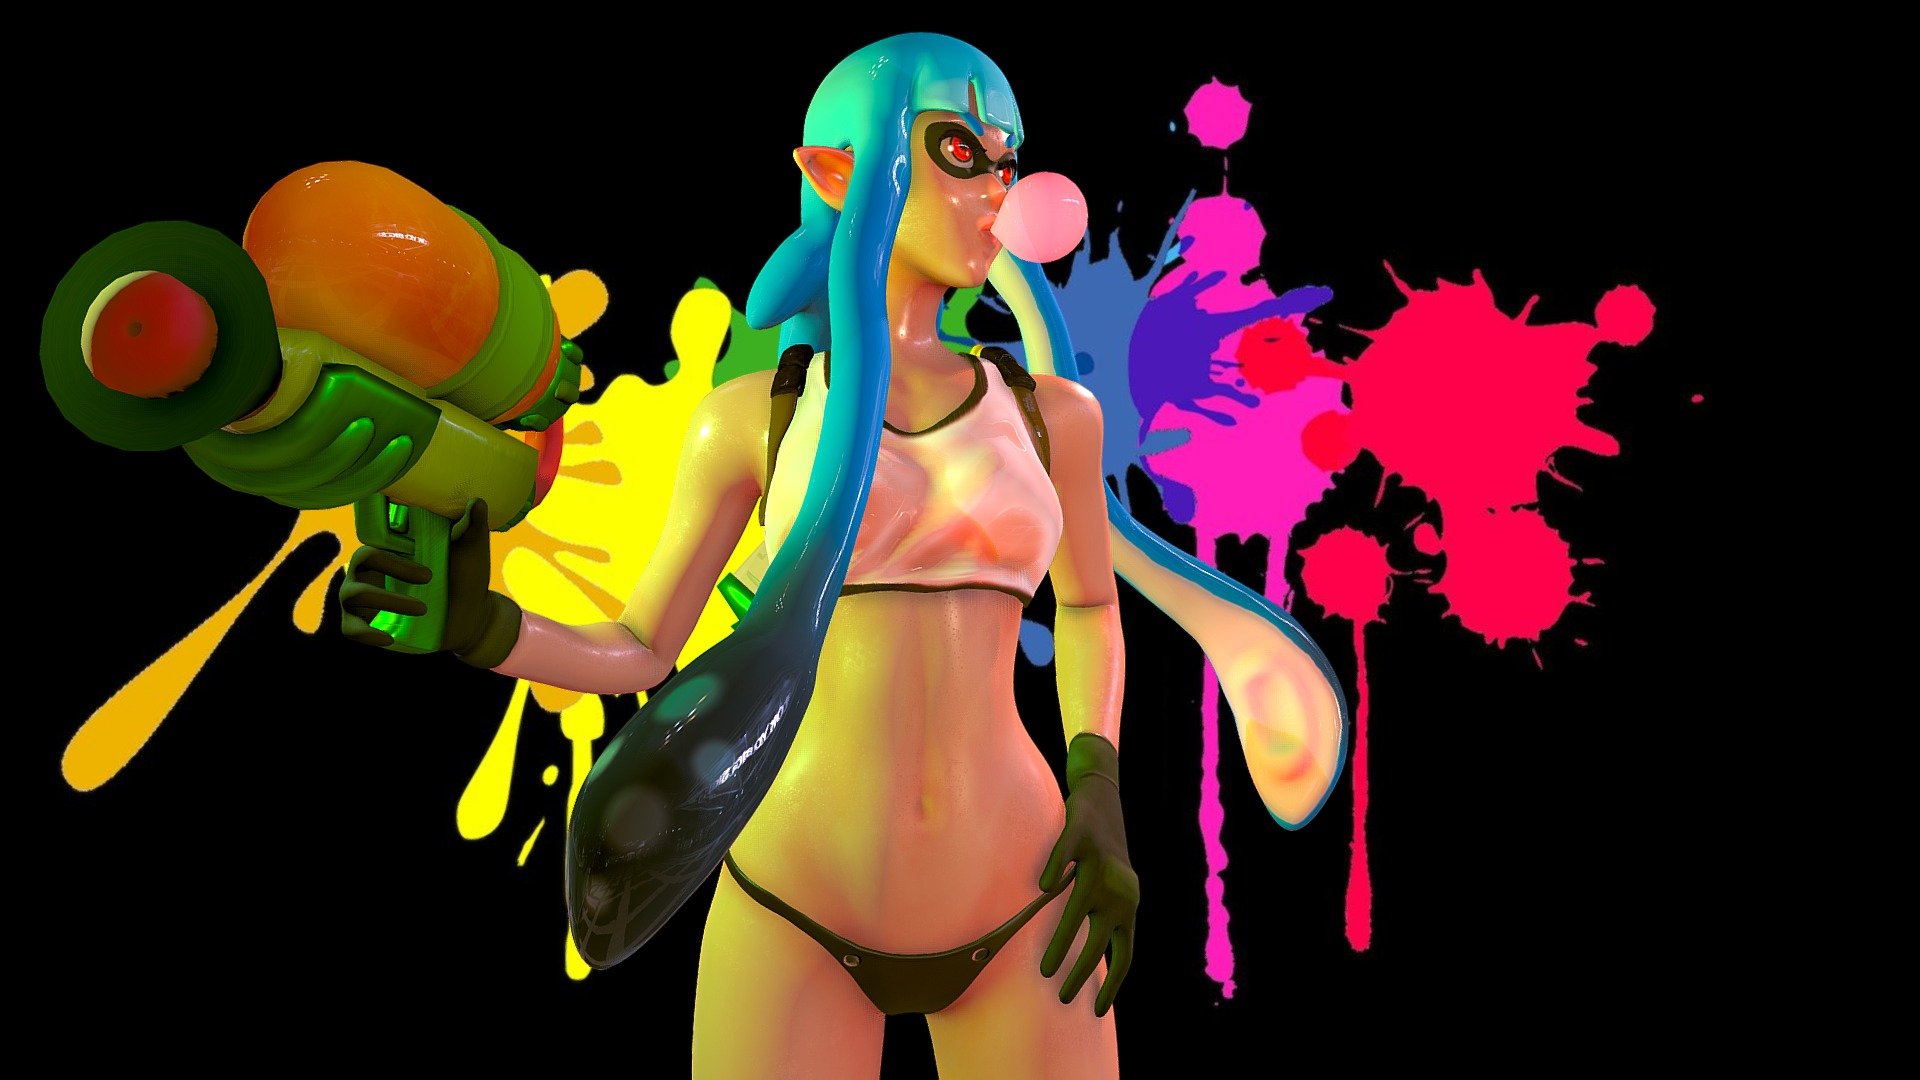 I saw this adult version of a girl inkling from Splatoon on the internet an...